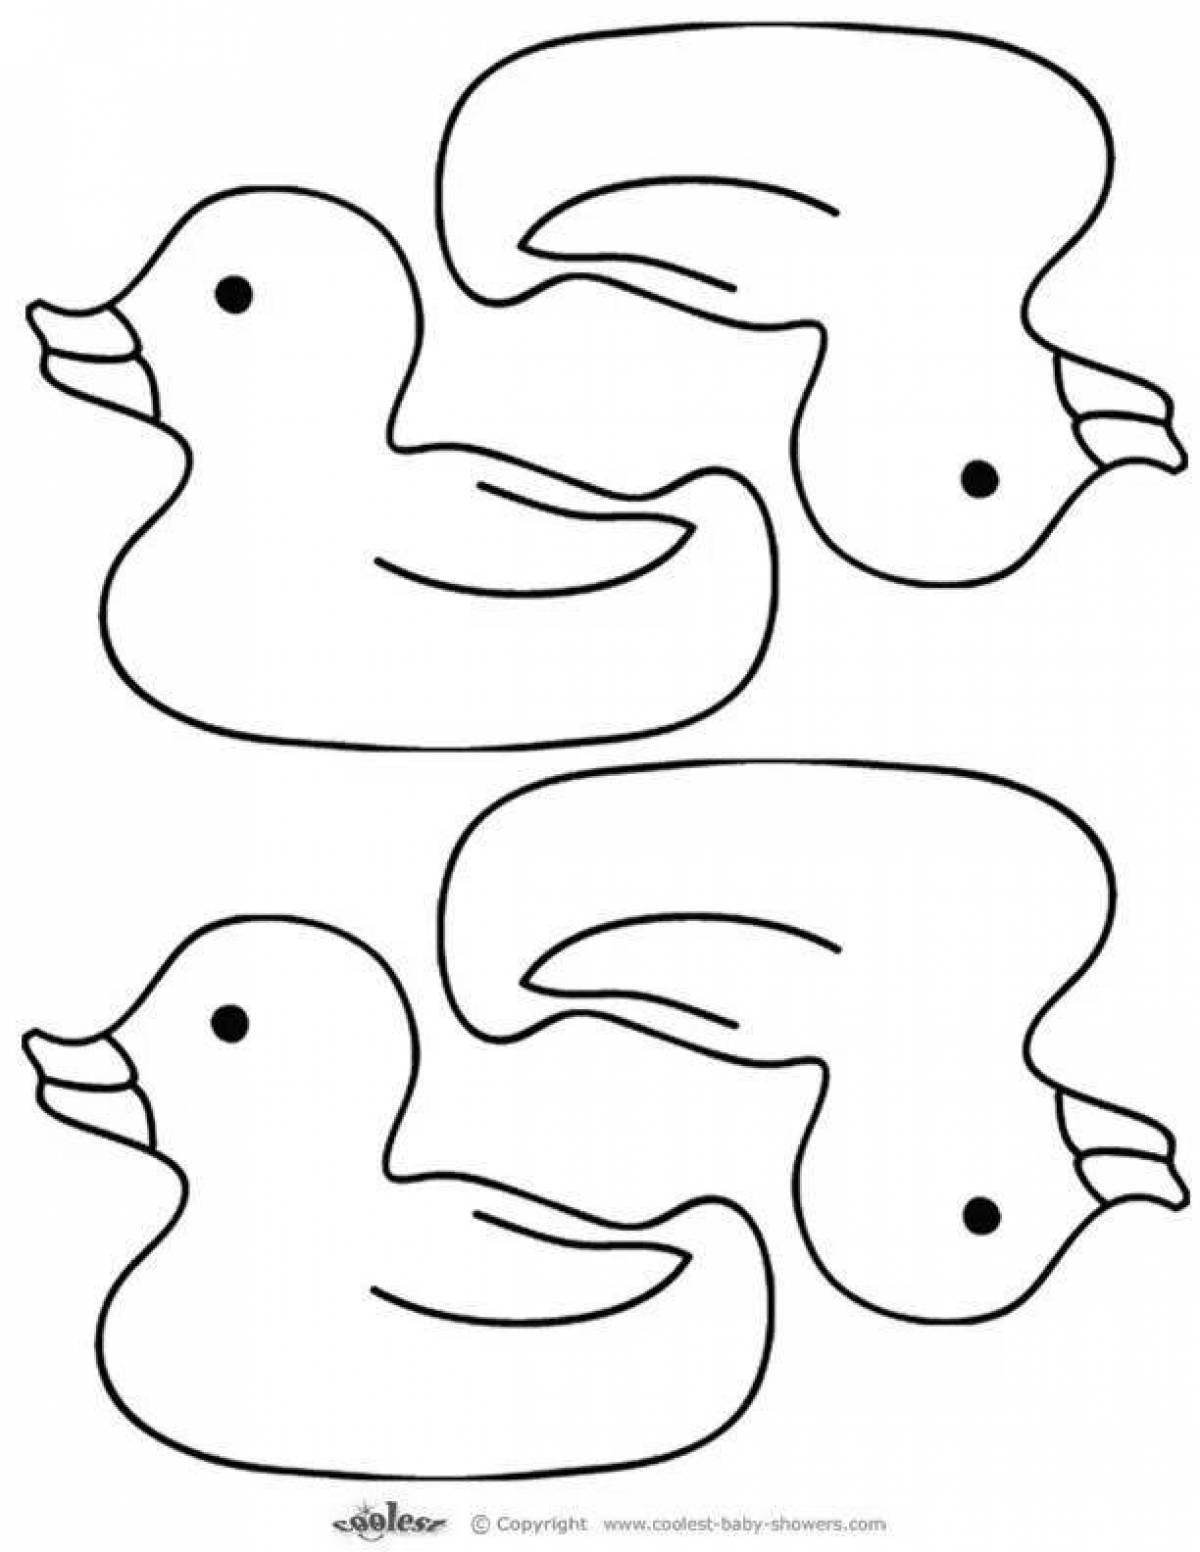 Merry Dymkovo toy duck 2 junior group coloring